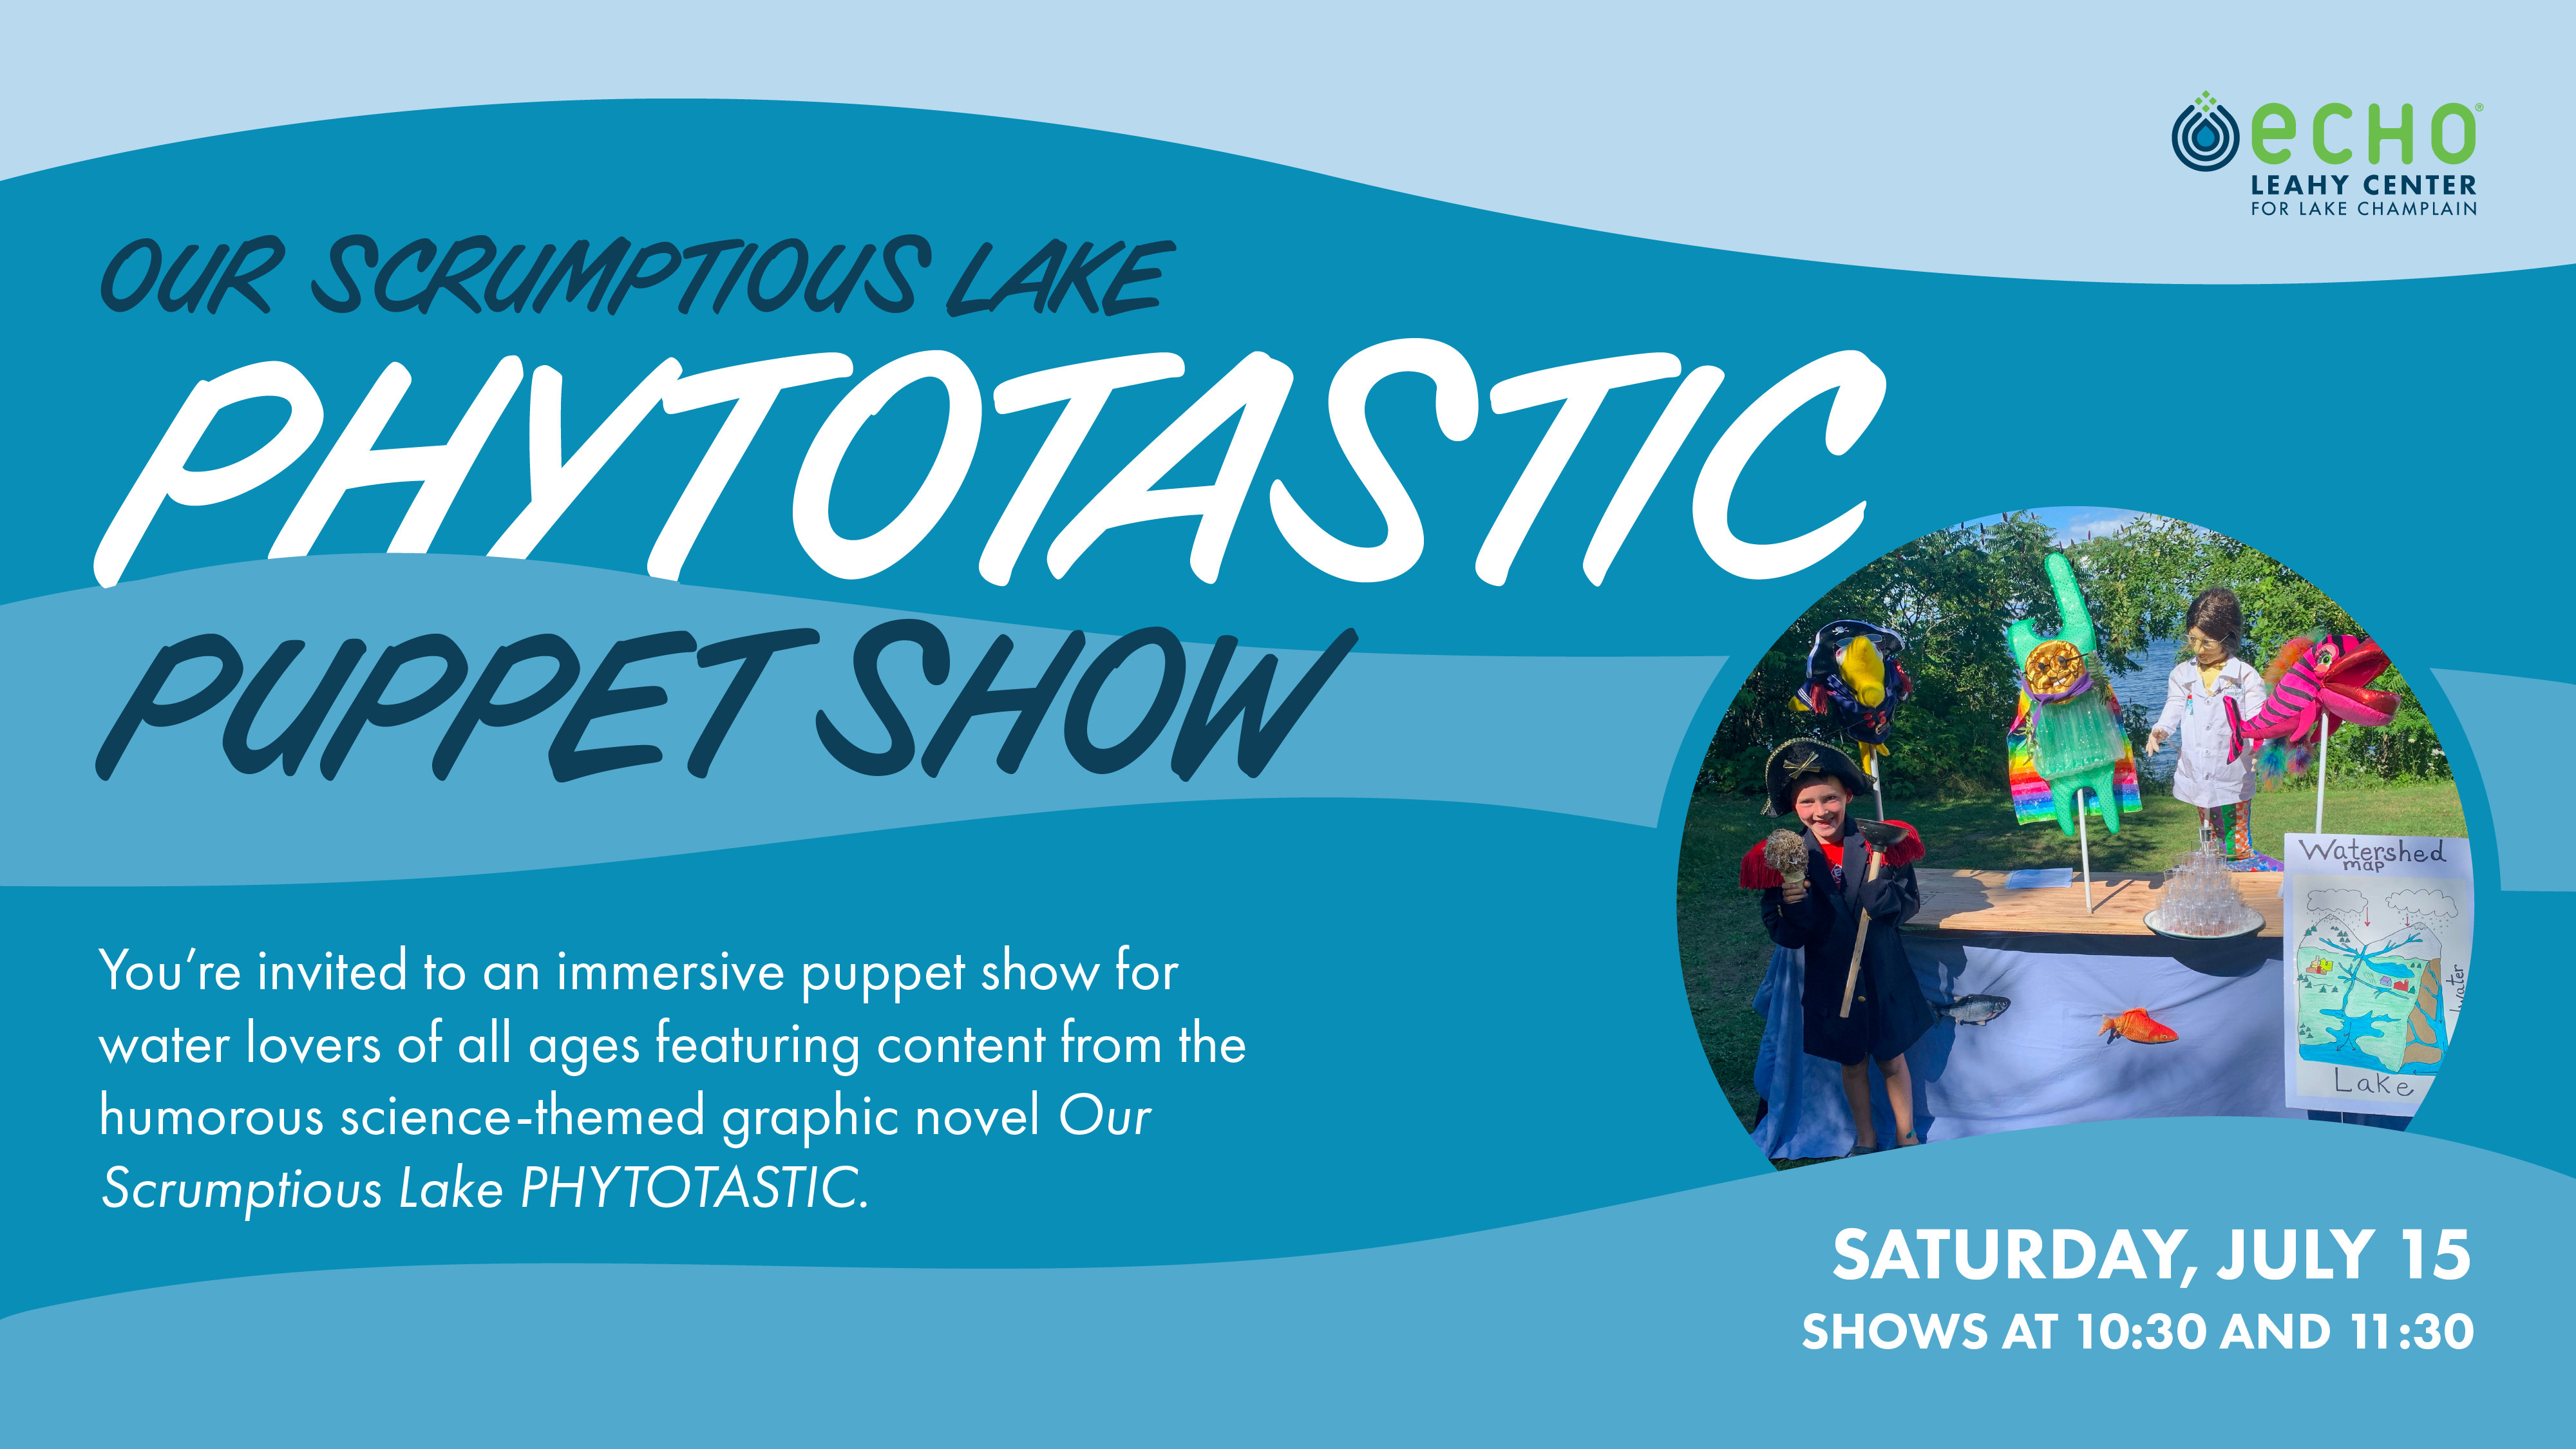 An underwater-themed graphic advertising the Our Scrumptious Lake PHYTOTASTIC Puppet Show